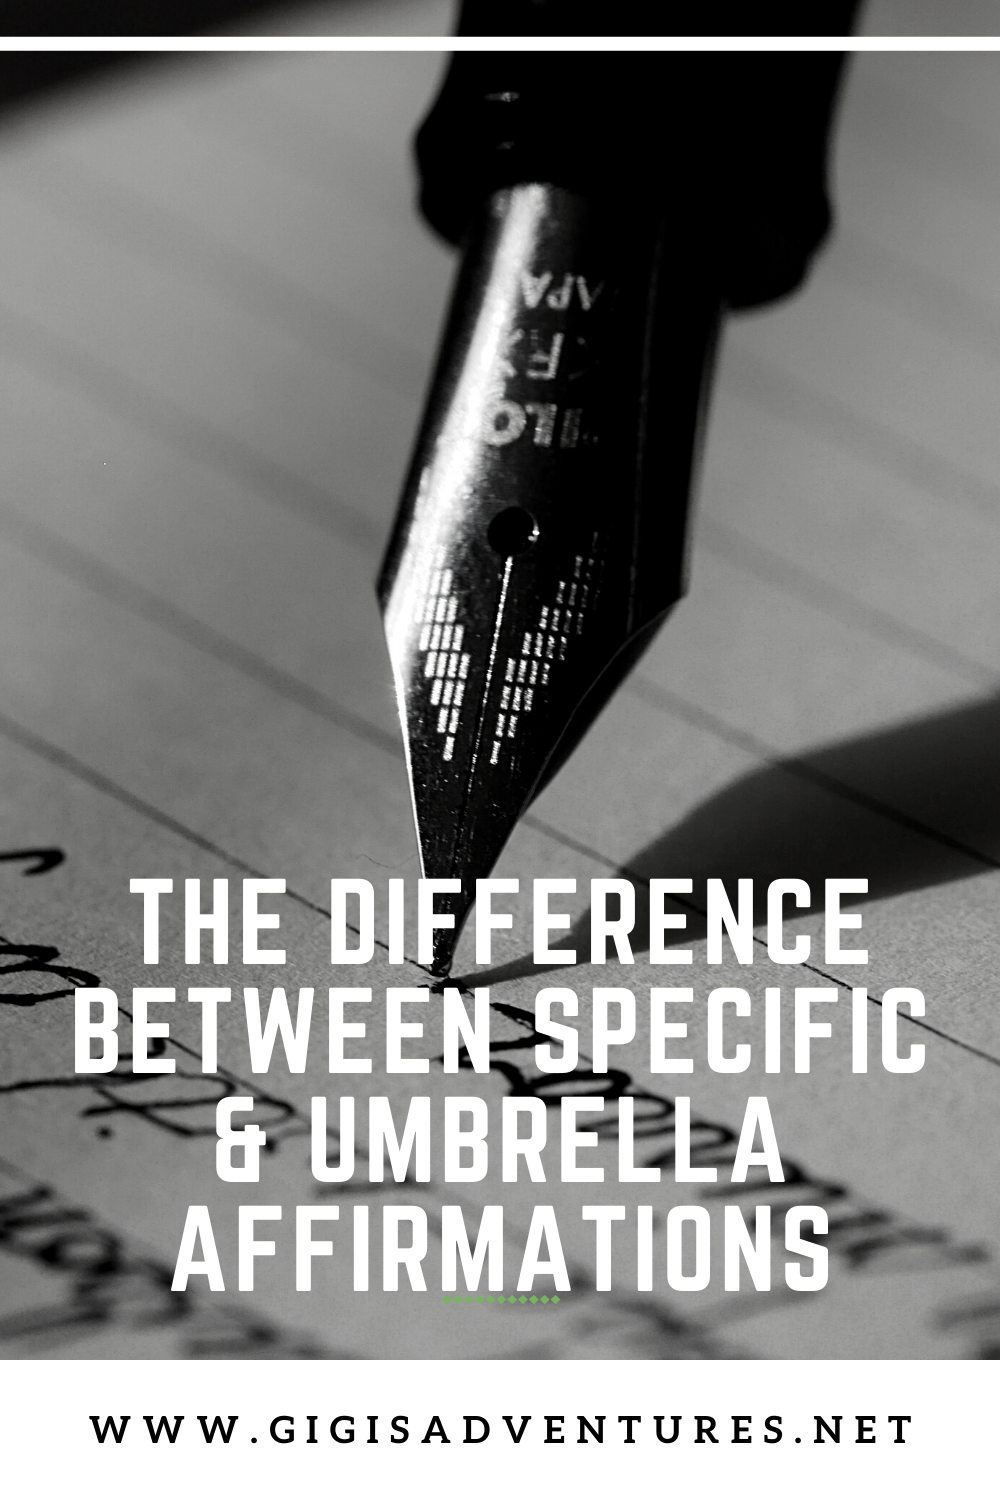 What's The Difference Between Umbrella Affirmations vs Specific Affirmations?